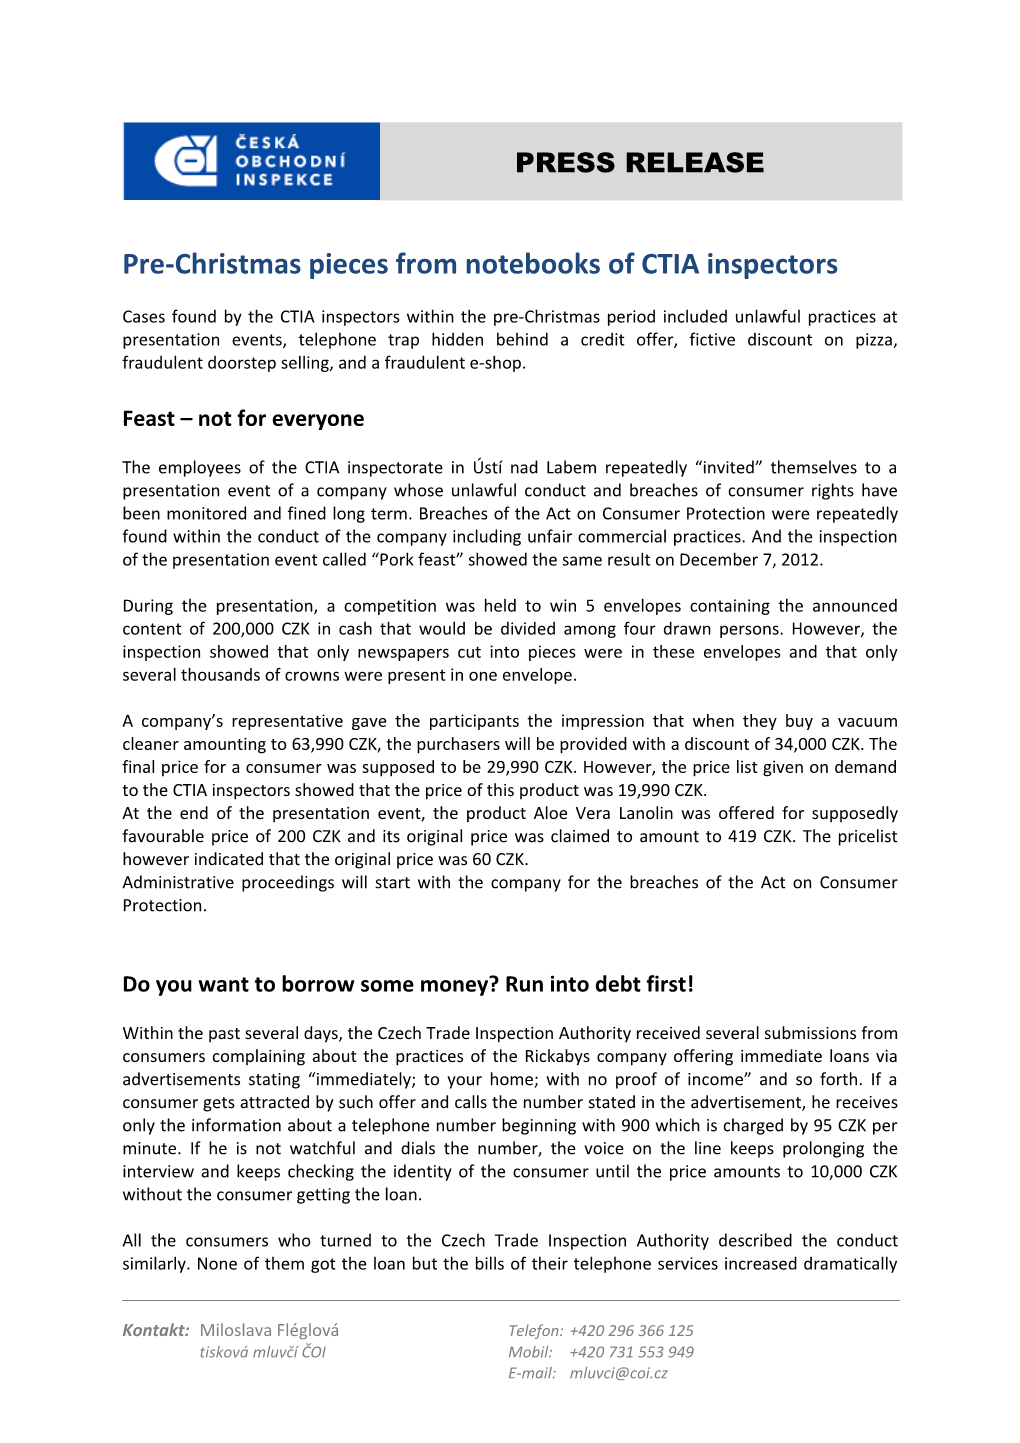 Pre-Christmas Pieces from Notebooks of CTIA Inspectors